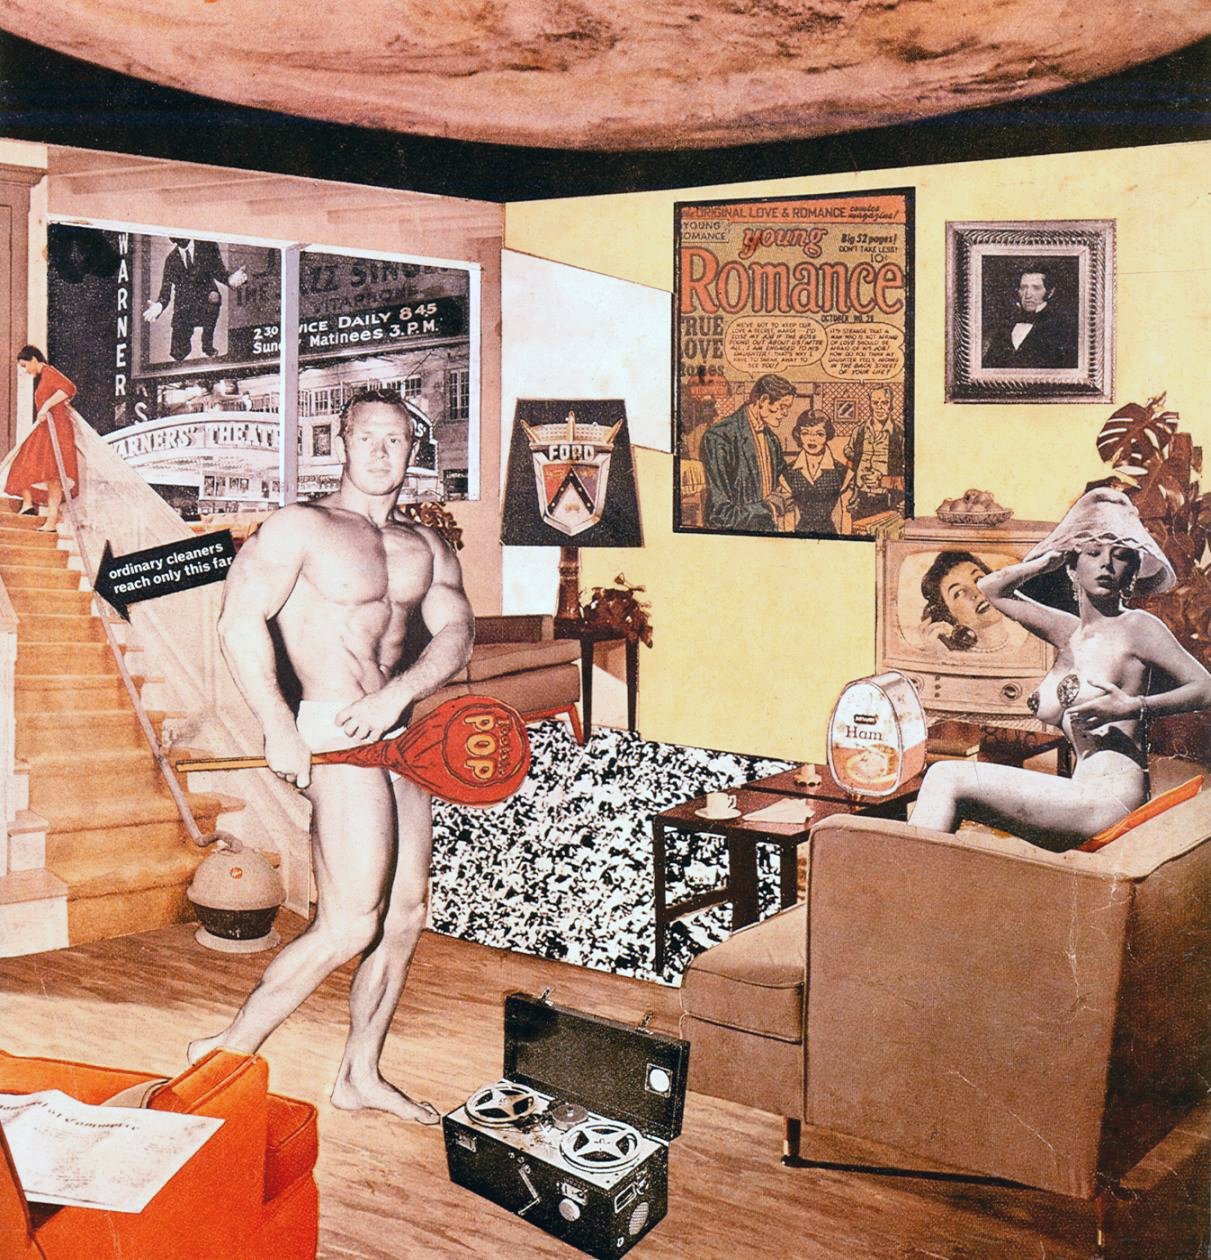 'Just what is it that makes today's homes so different, so appealing?'. Richard Hamilton